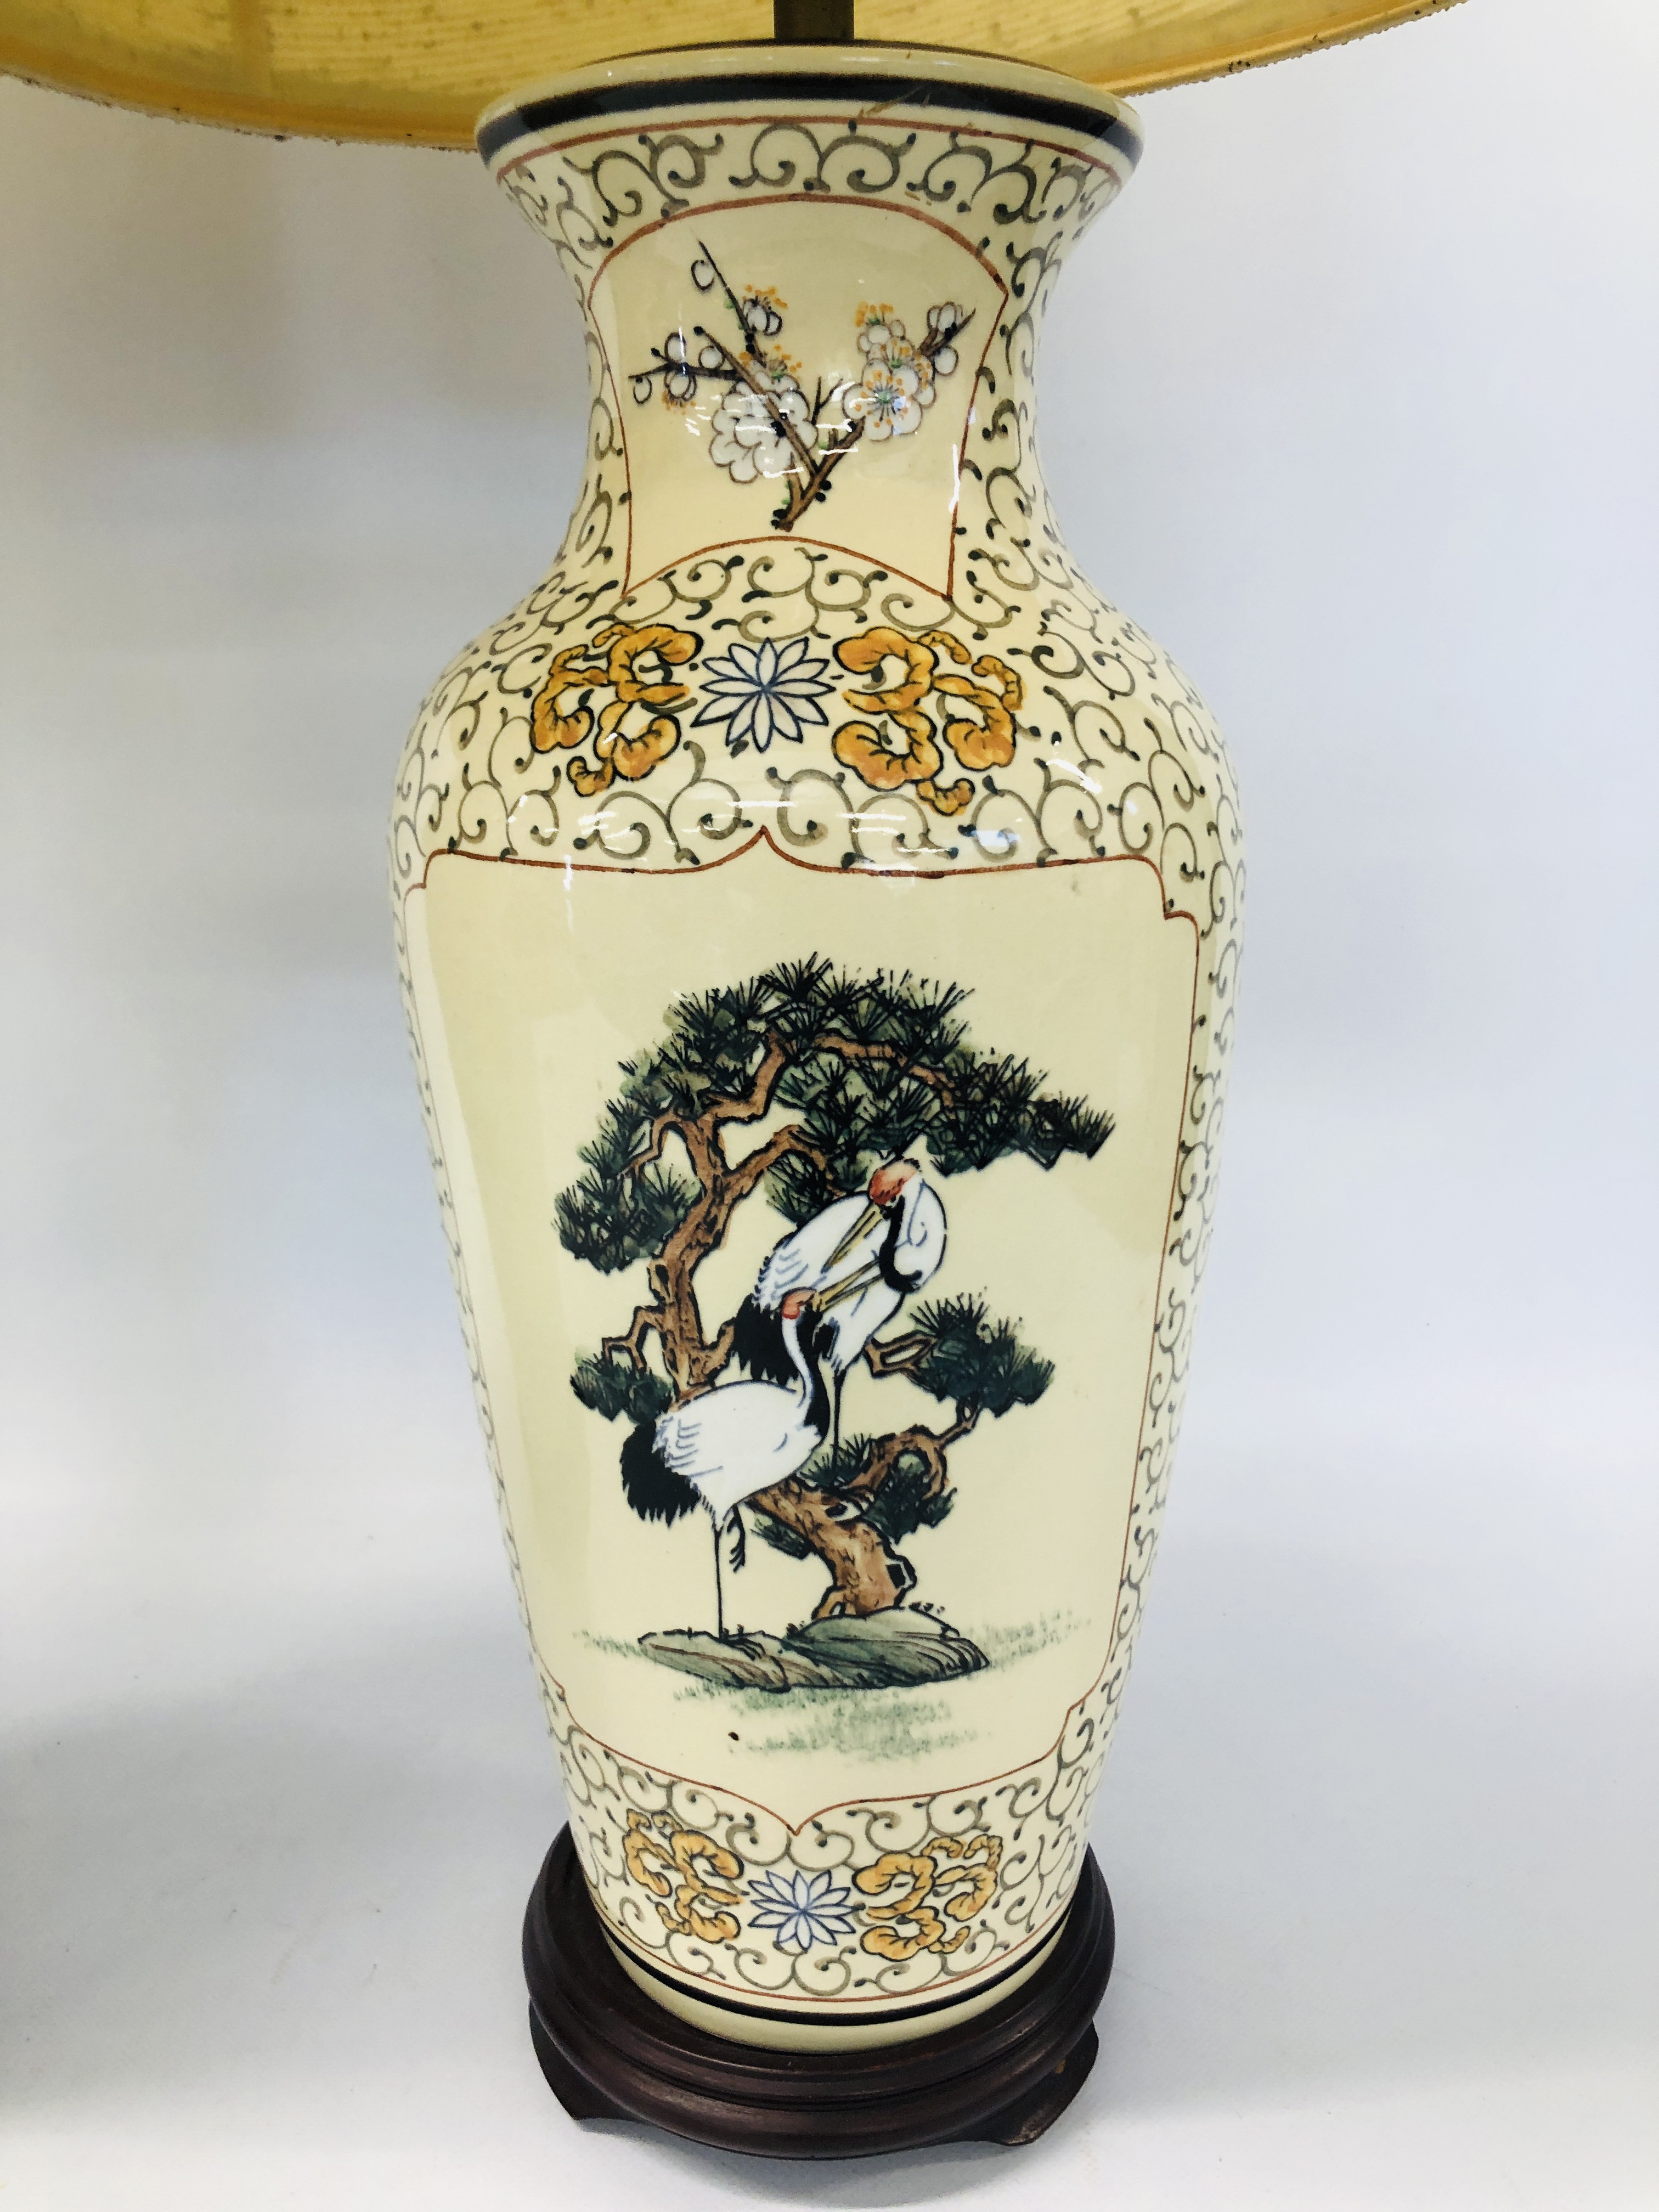 PAIR OF ORIENTAL STORK PATTERN TABLE LAMP BASES ALONG WITH LARGE BEIGE SHADES - SOLD AS SEEN - - Image 3 of 9